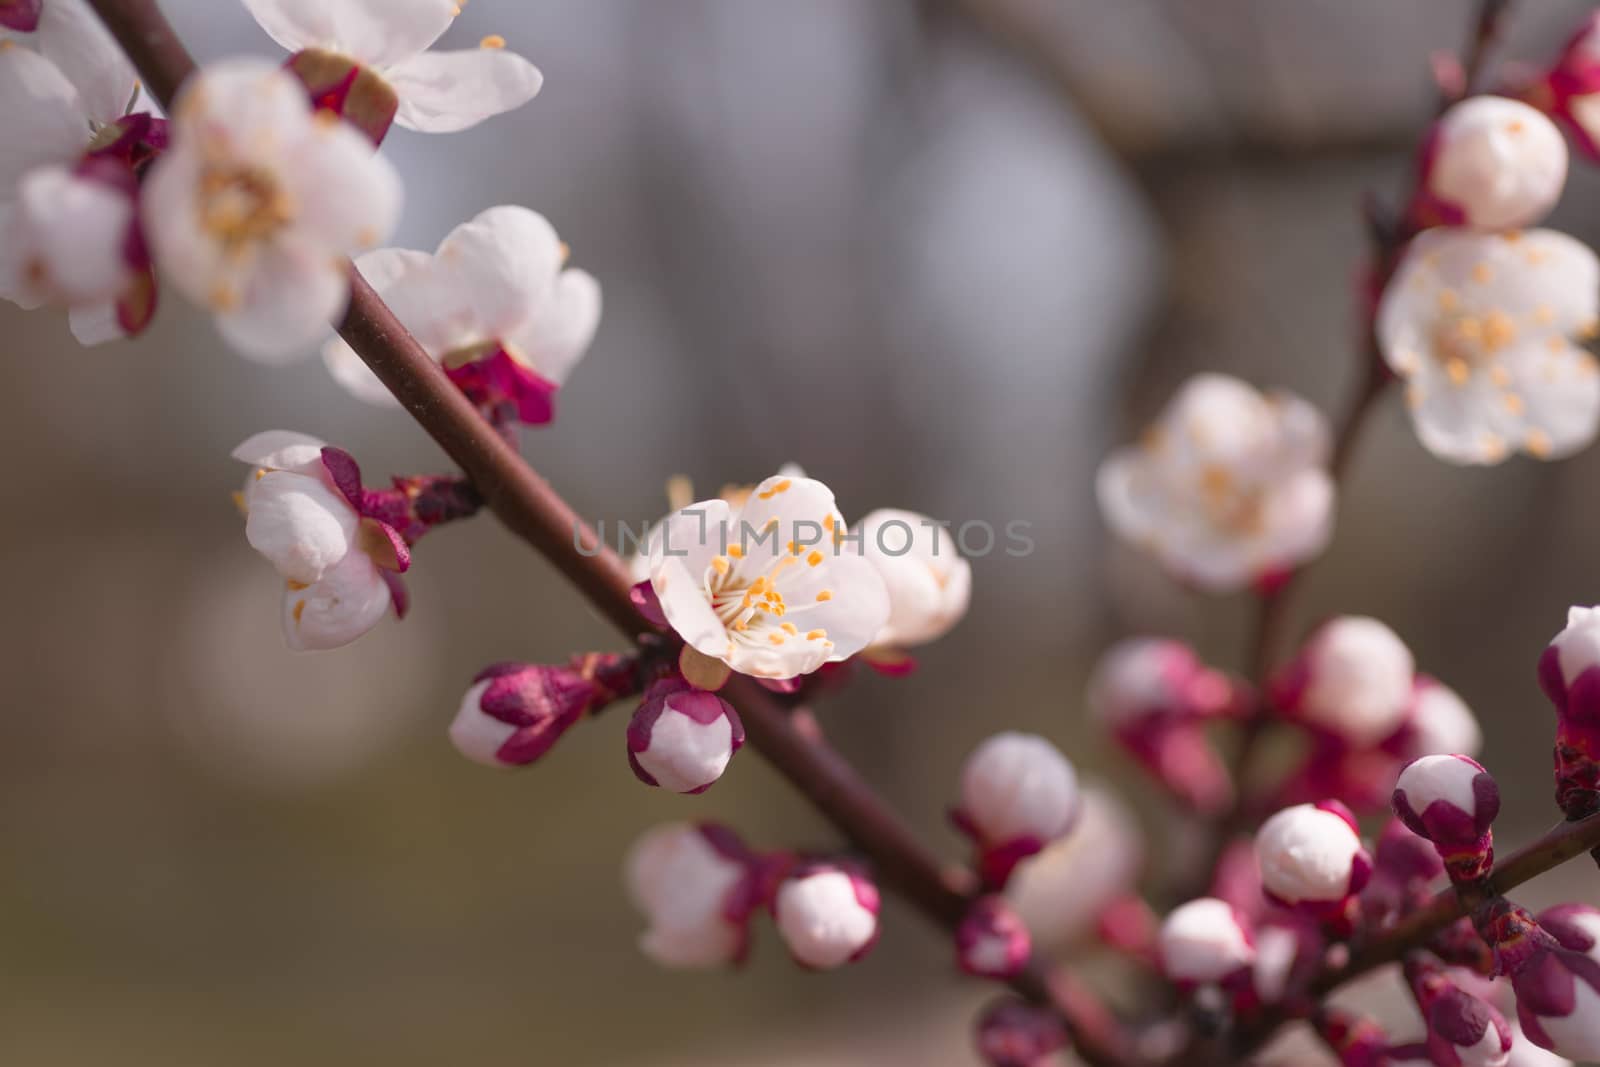 Apricot flower inflorescences on blurred background. by alexsdriver